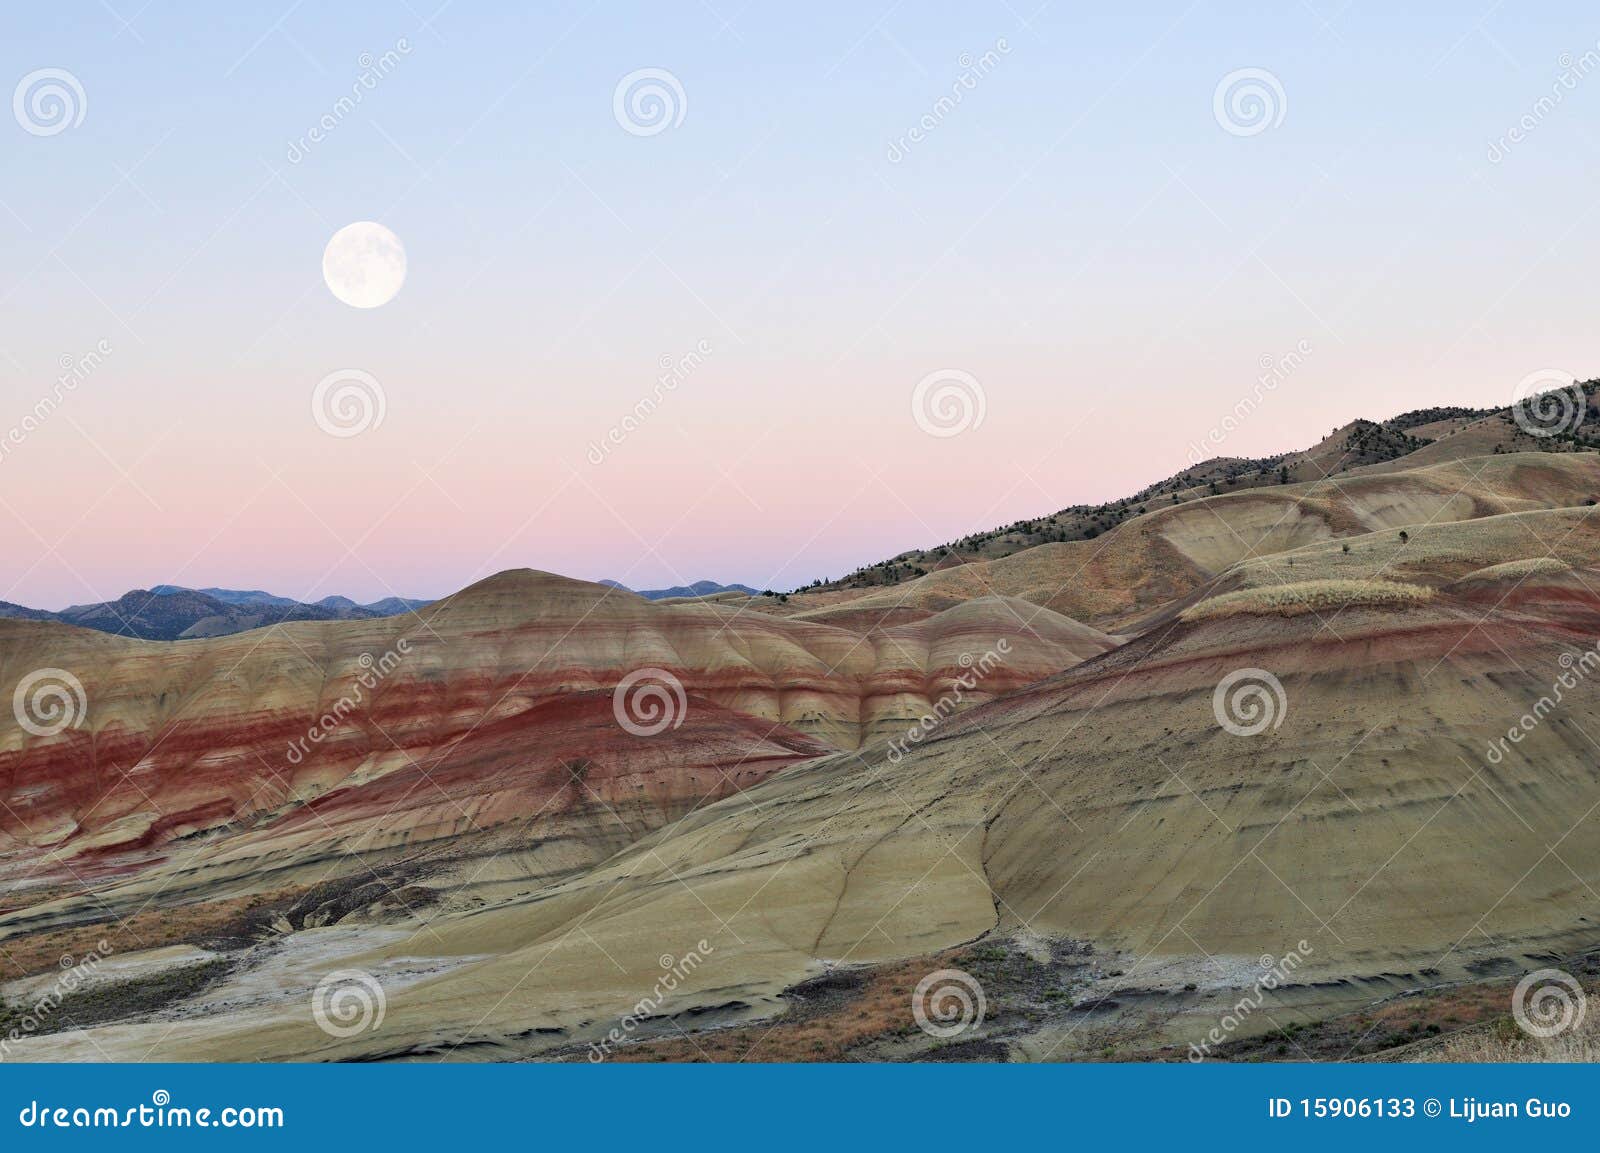 painted hills at moonrise